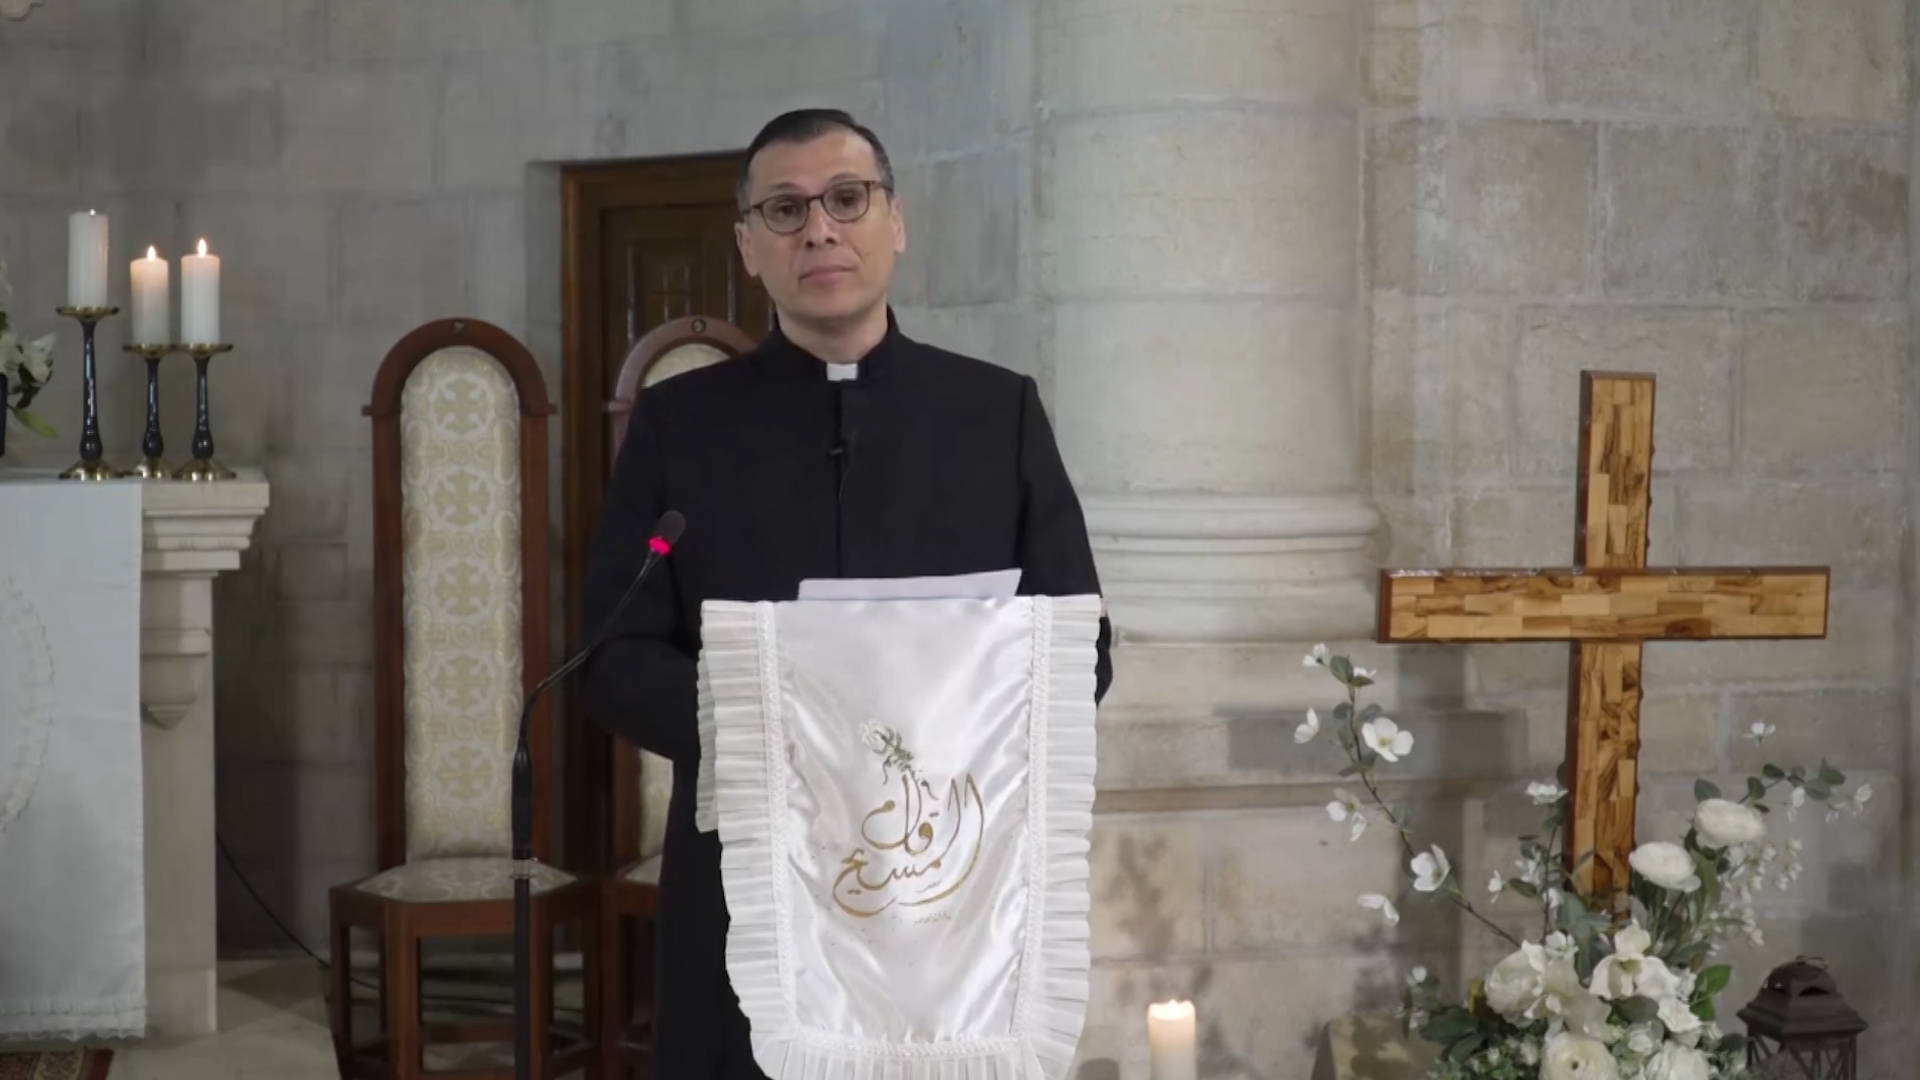 Bethlehem Reverend speaks out on Israel’s effects on Palestinian Christians: “Slowly Losing Lives in the World’s Gaze”